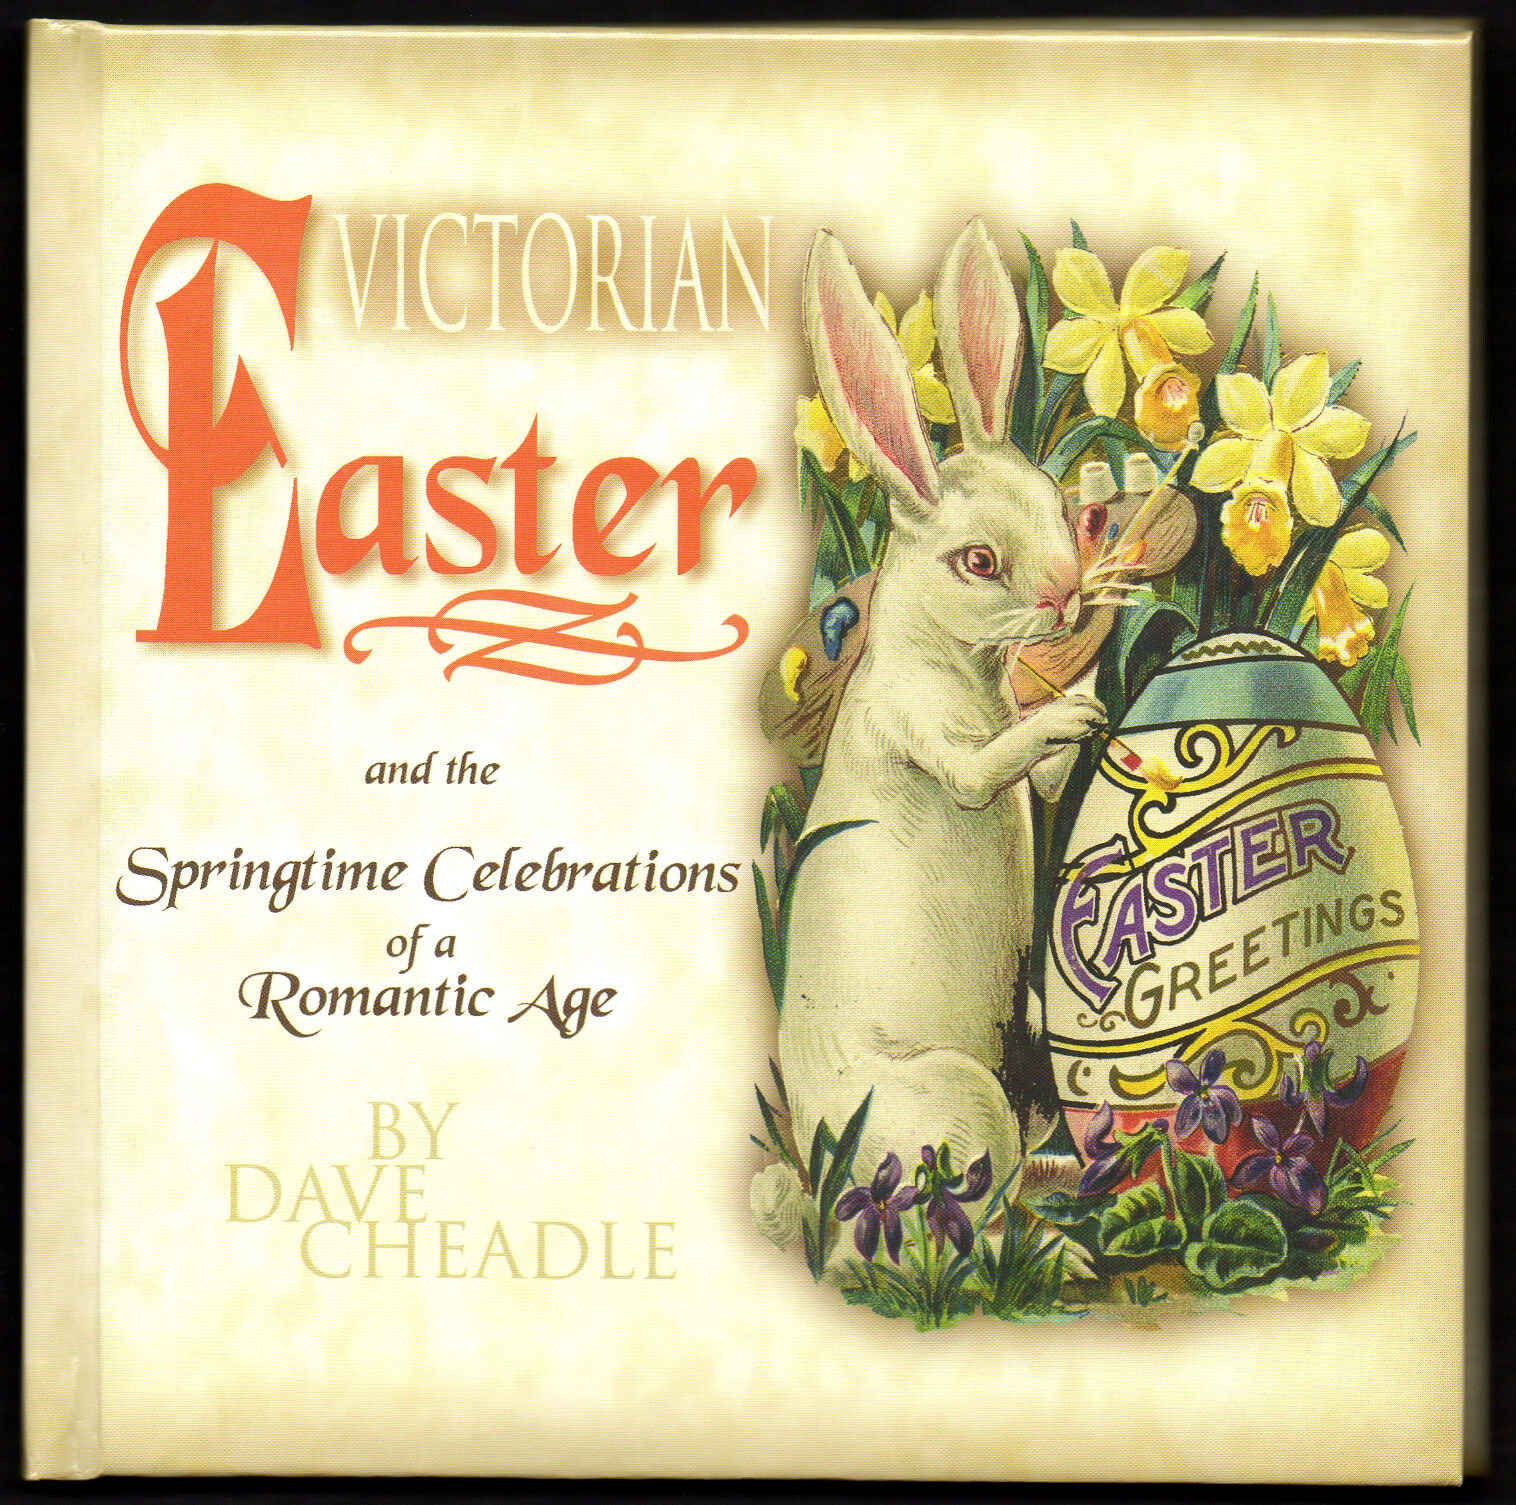 Easter Holiday Book: Antique Victorian PostCard & Trade Card Images Dave Cheadle